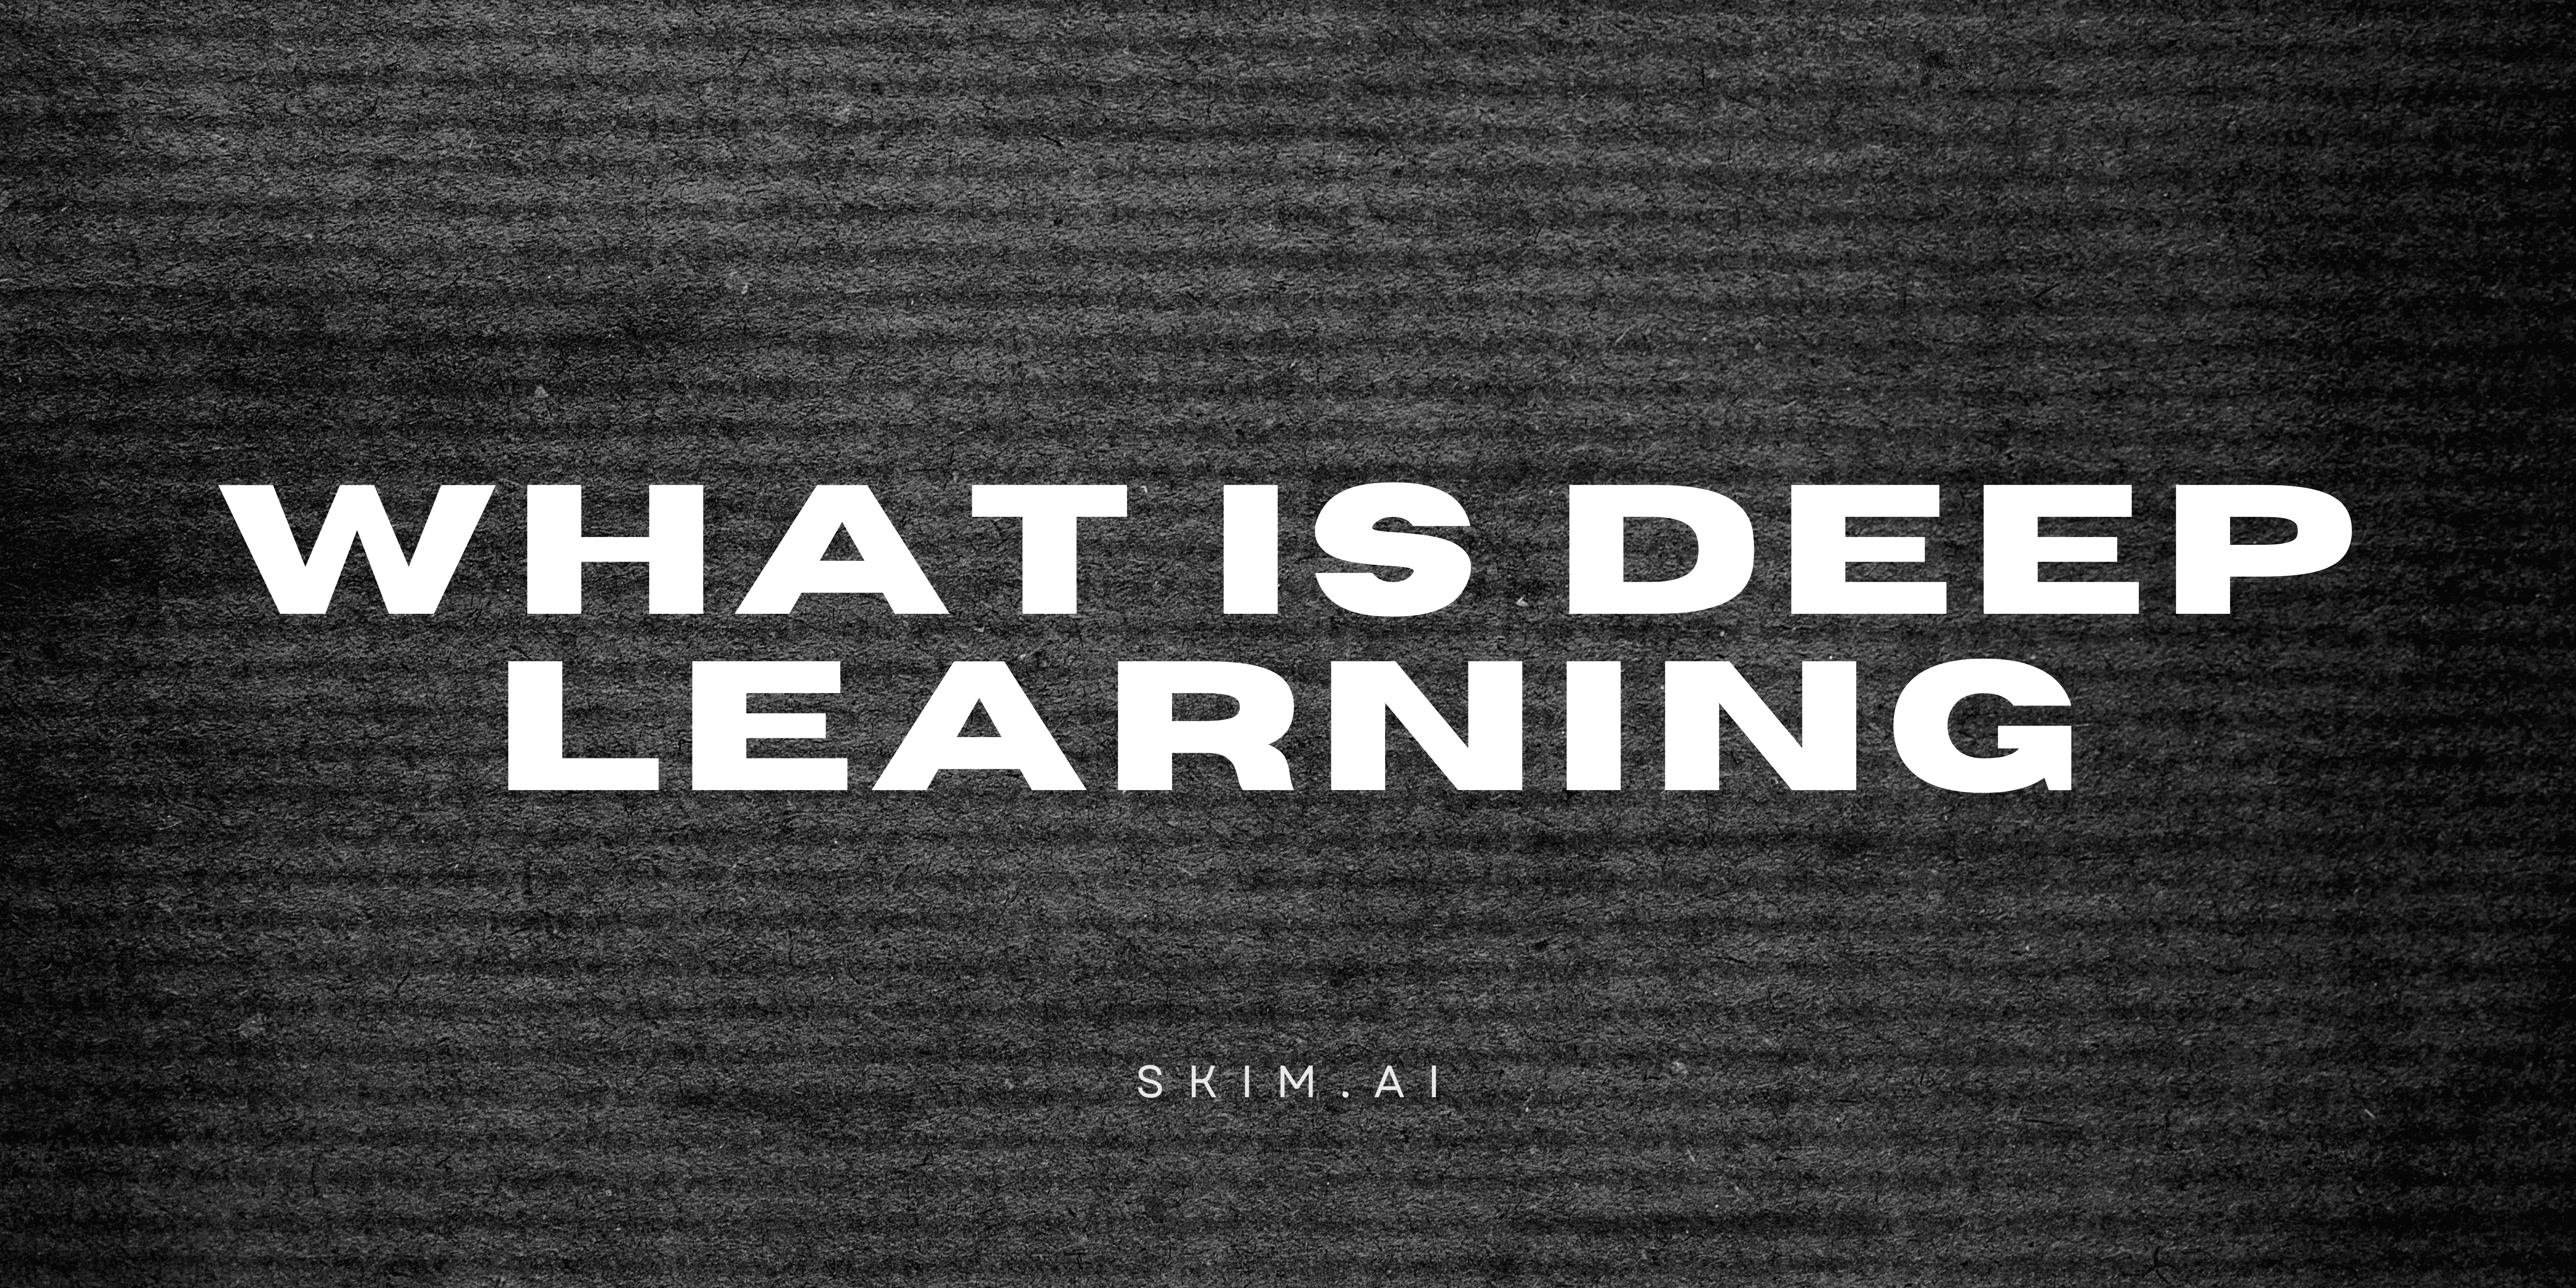 What Is Deep Learning?